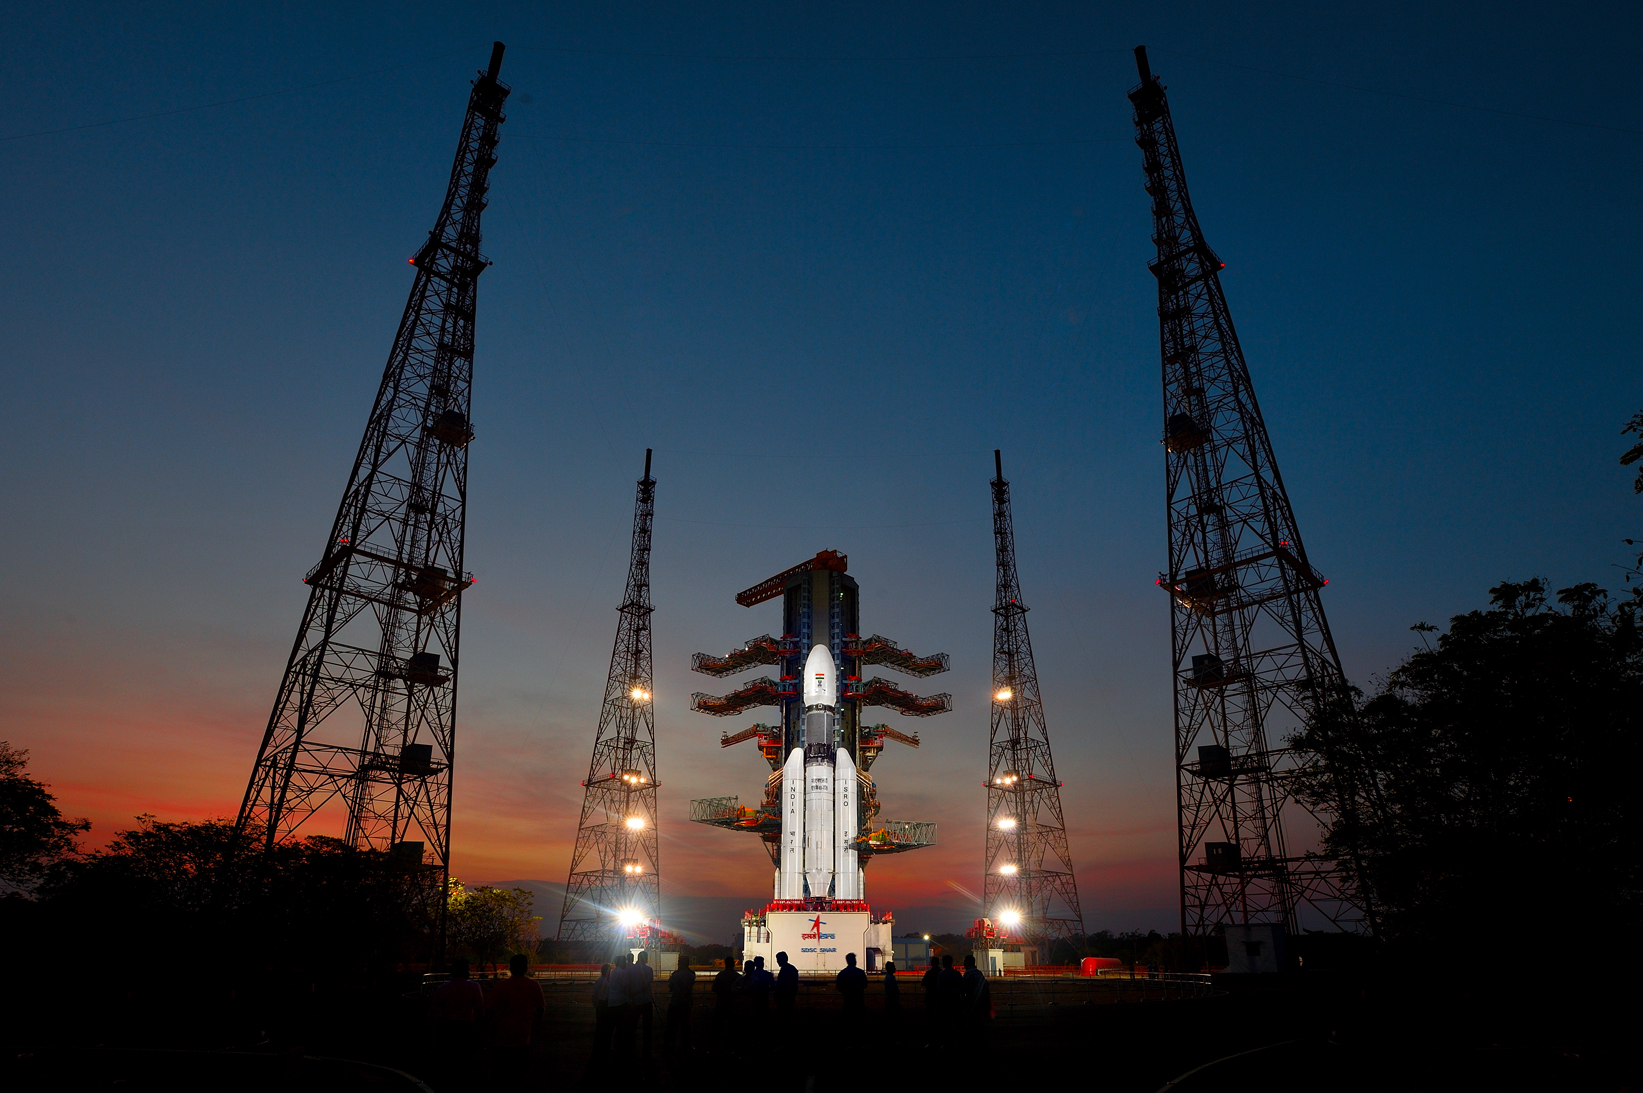 thefullyintegratedgslv-mkiii-d1carryinggsat-19atthesecondlaunchpad-anotherview